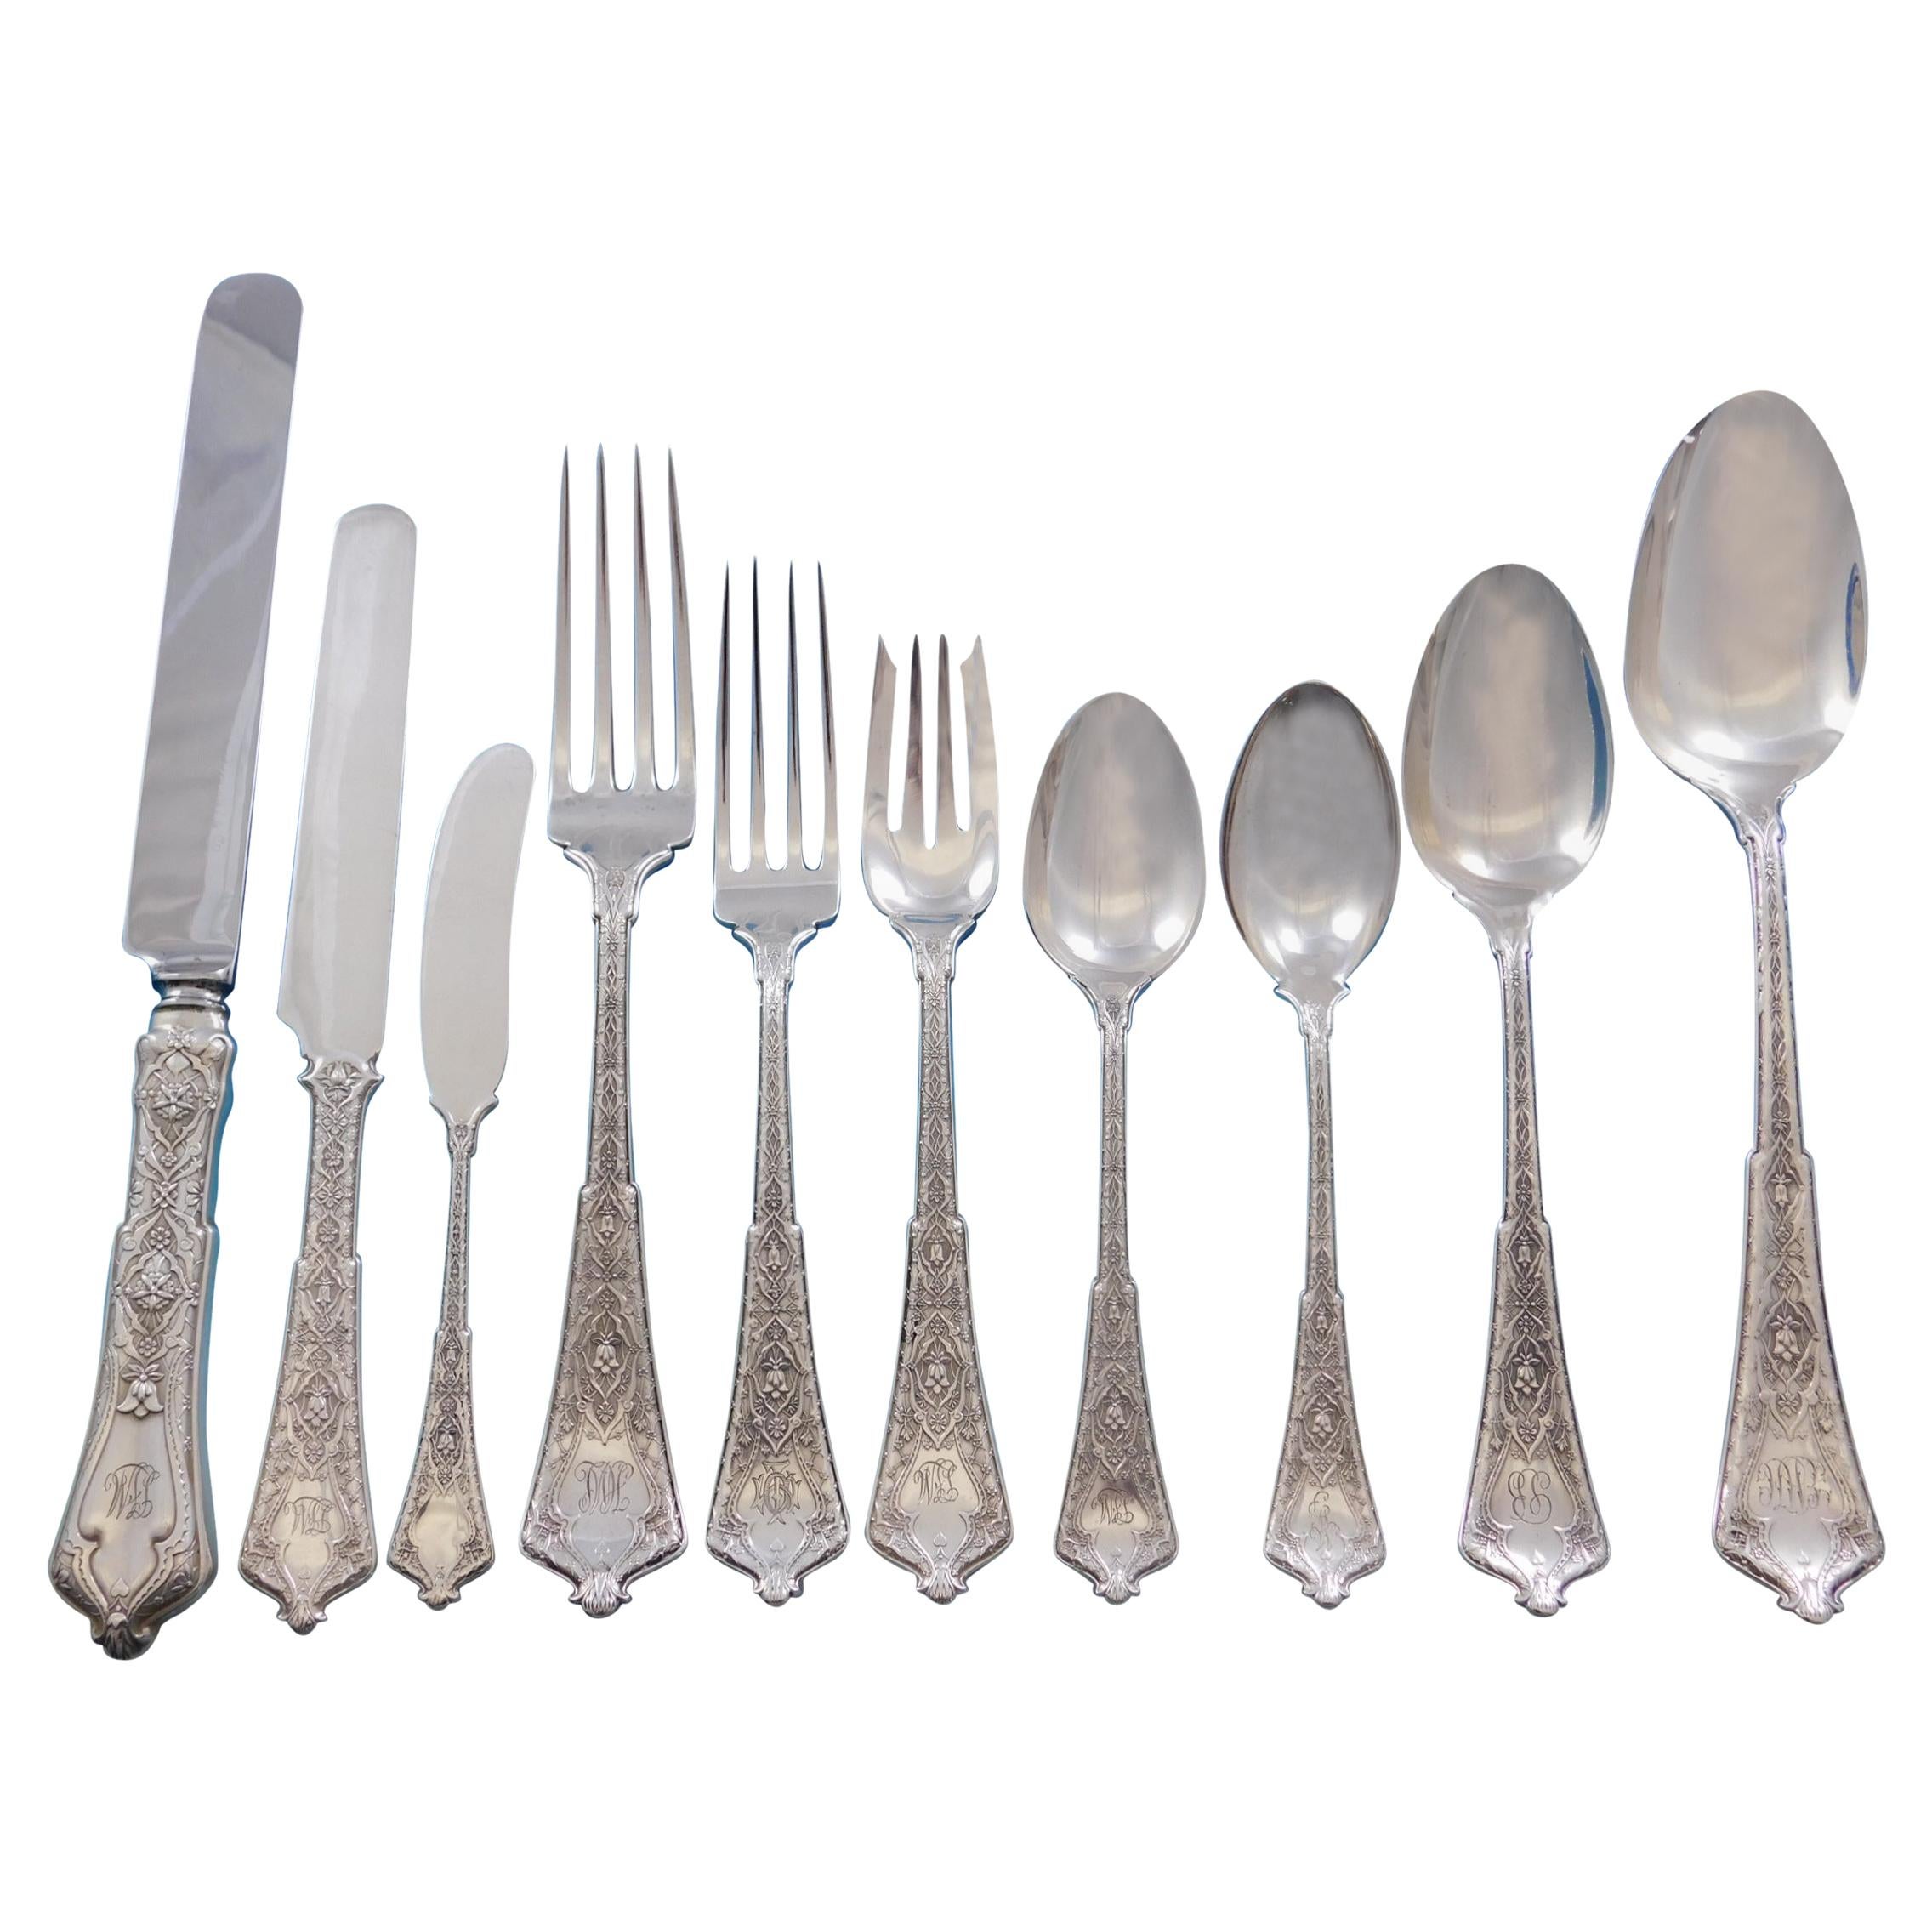 Persian by Tiffany Sterling Silver Silverware Set 12 Service 122 Pcs Dinner